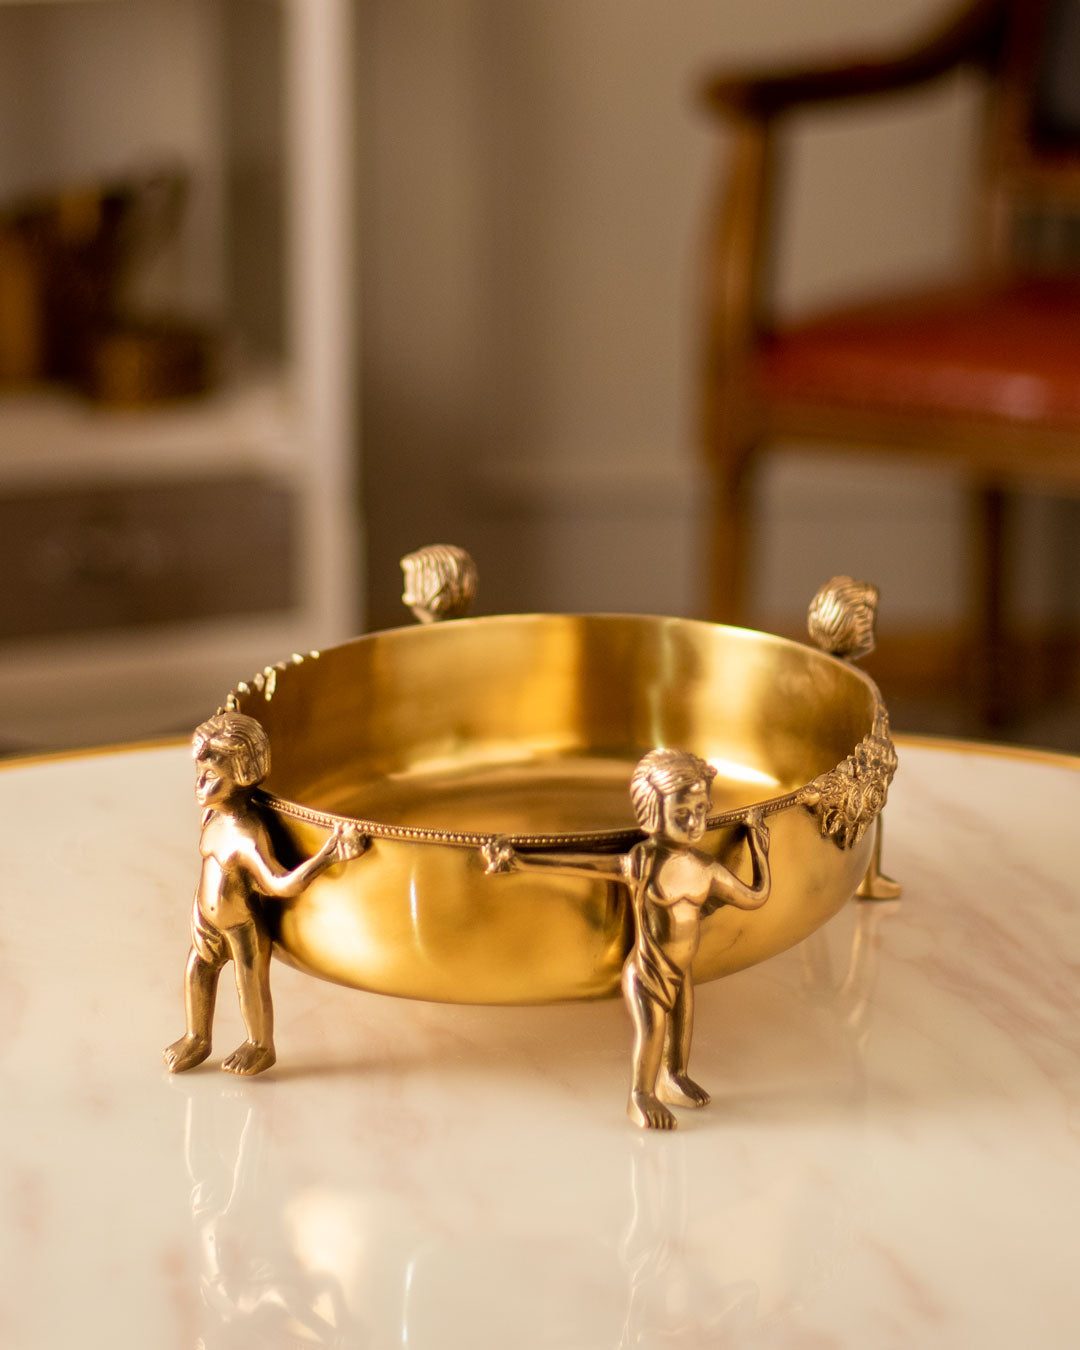 'Human' Handcrafted Brass Bowl